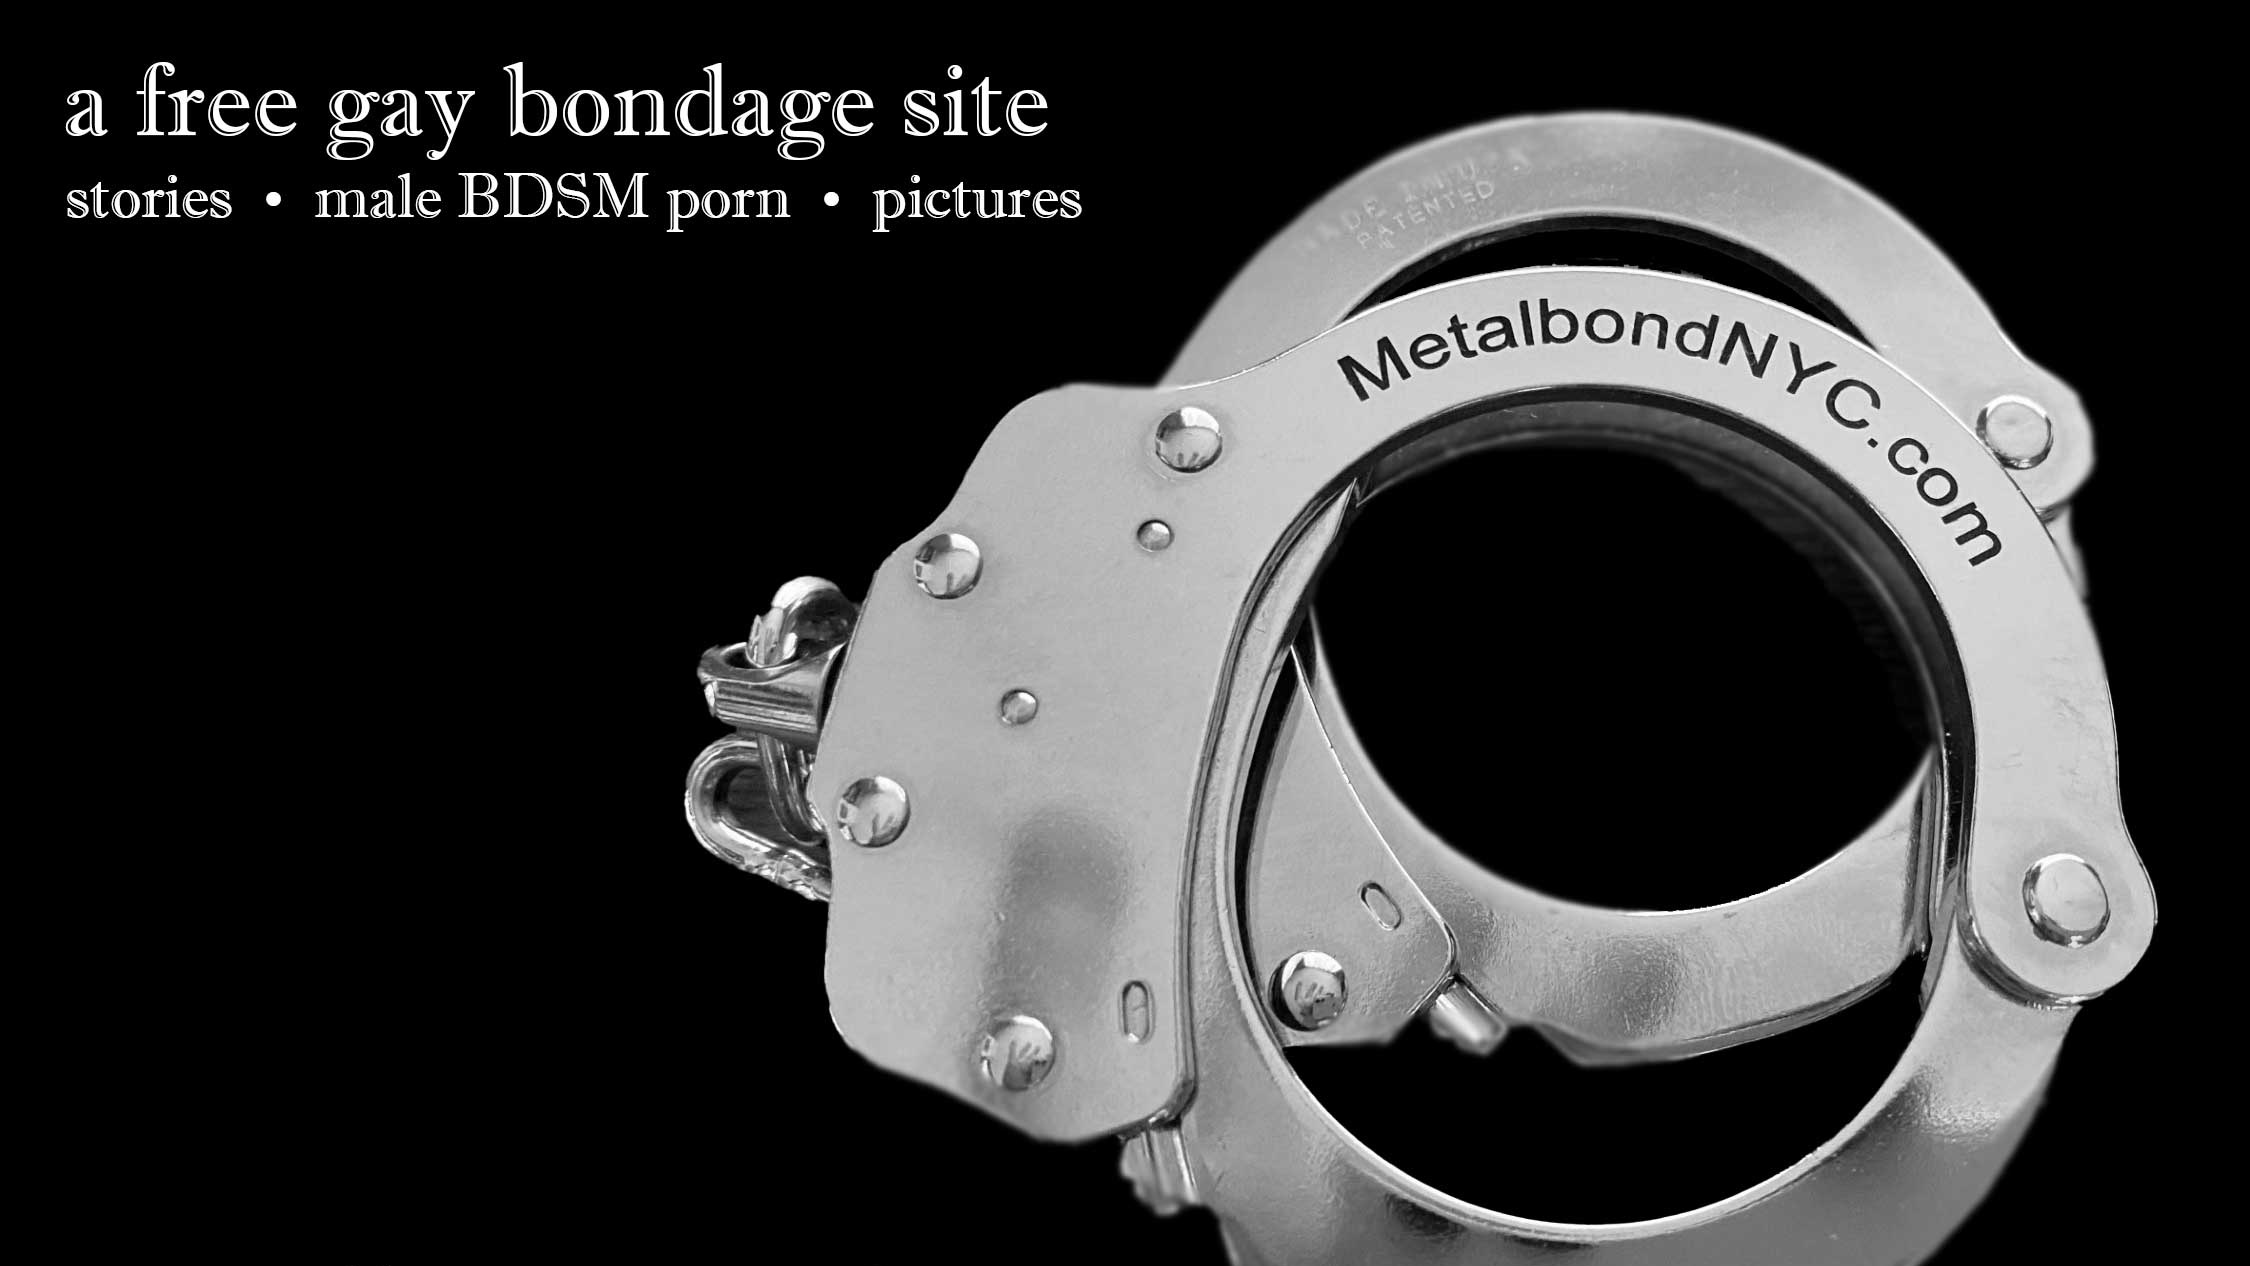 Get ready for even more male bondage stories to beat off to in the Metalbond Prison Library